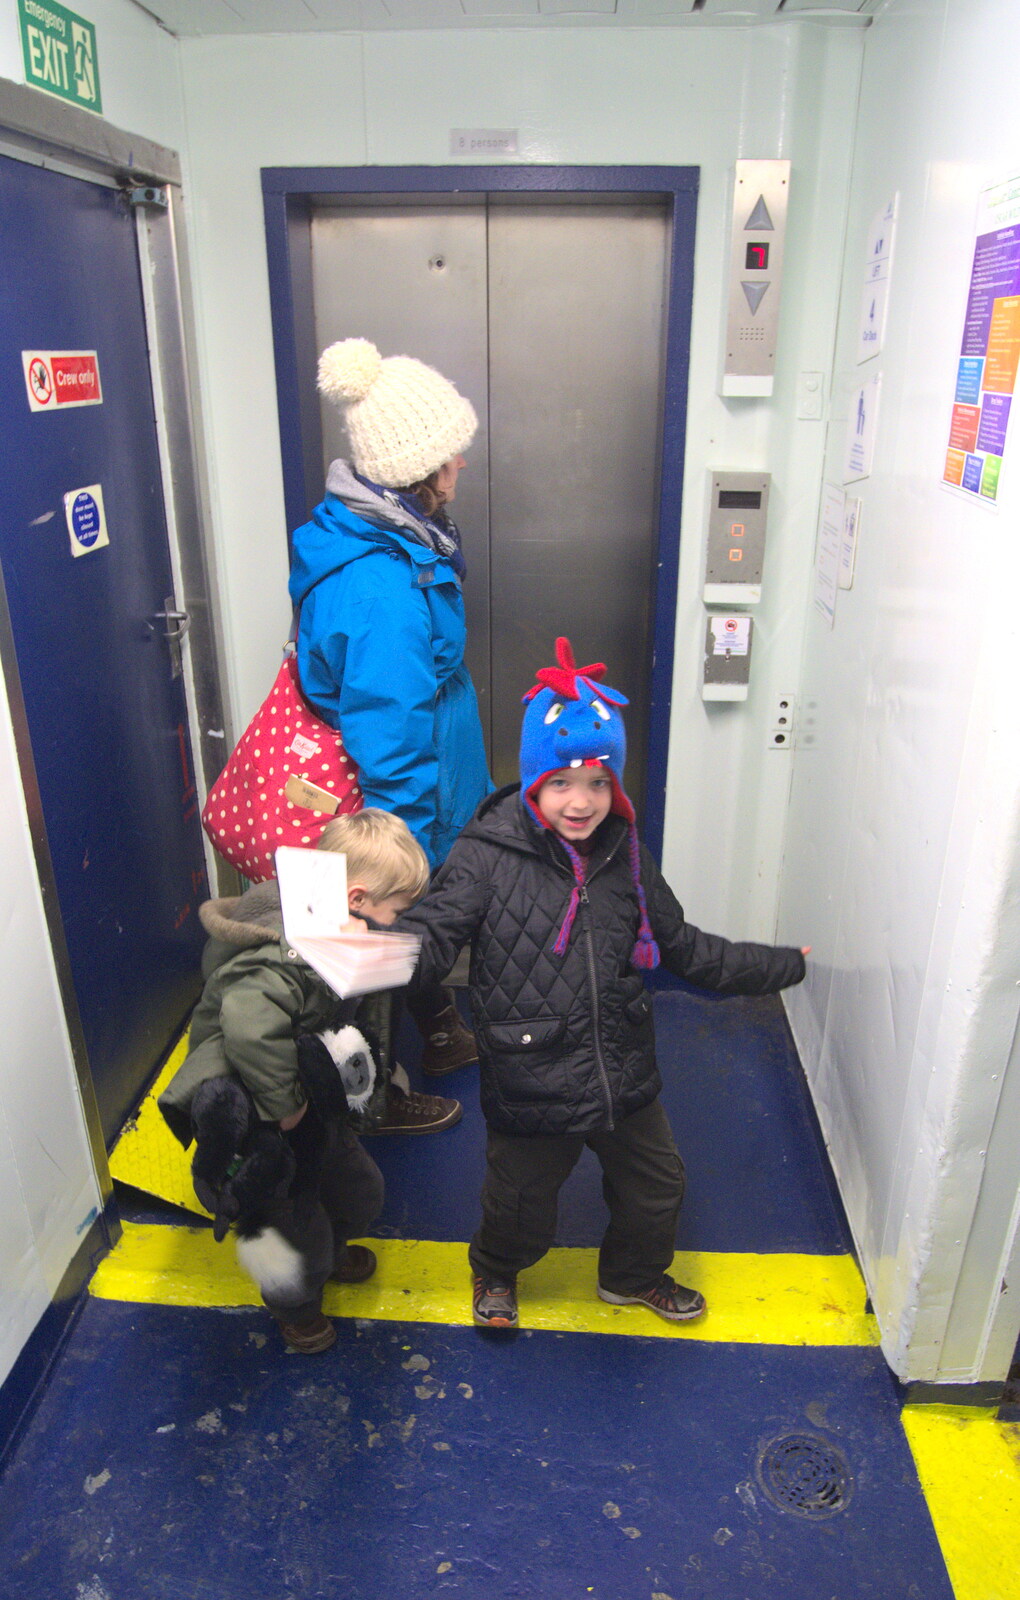 In the bowels of the ferry from Conwy, Holyhead and the Ferry to Ireland - 21st December 2015